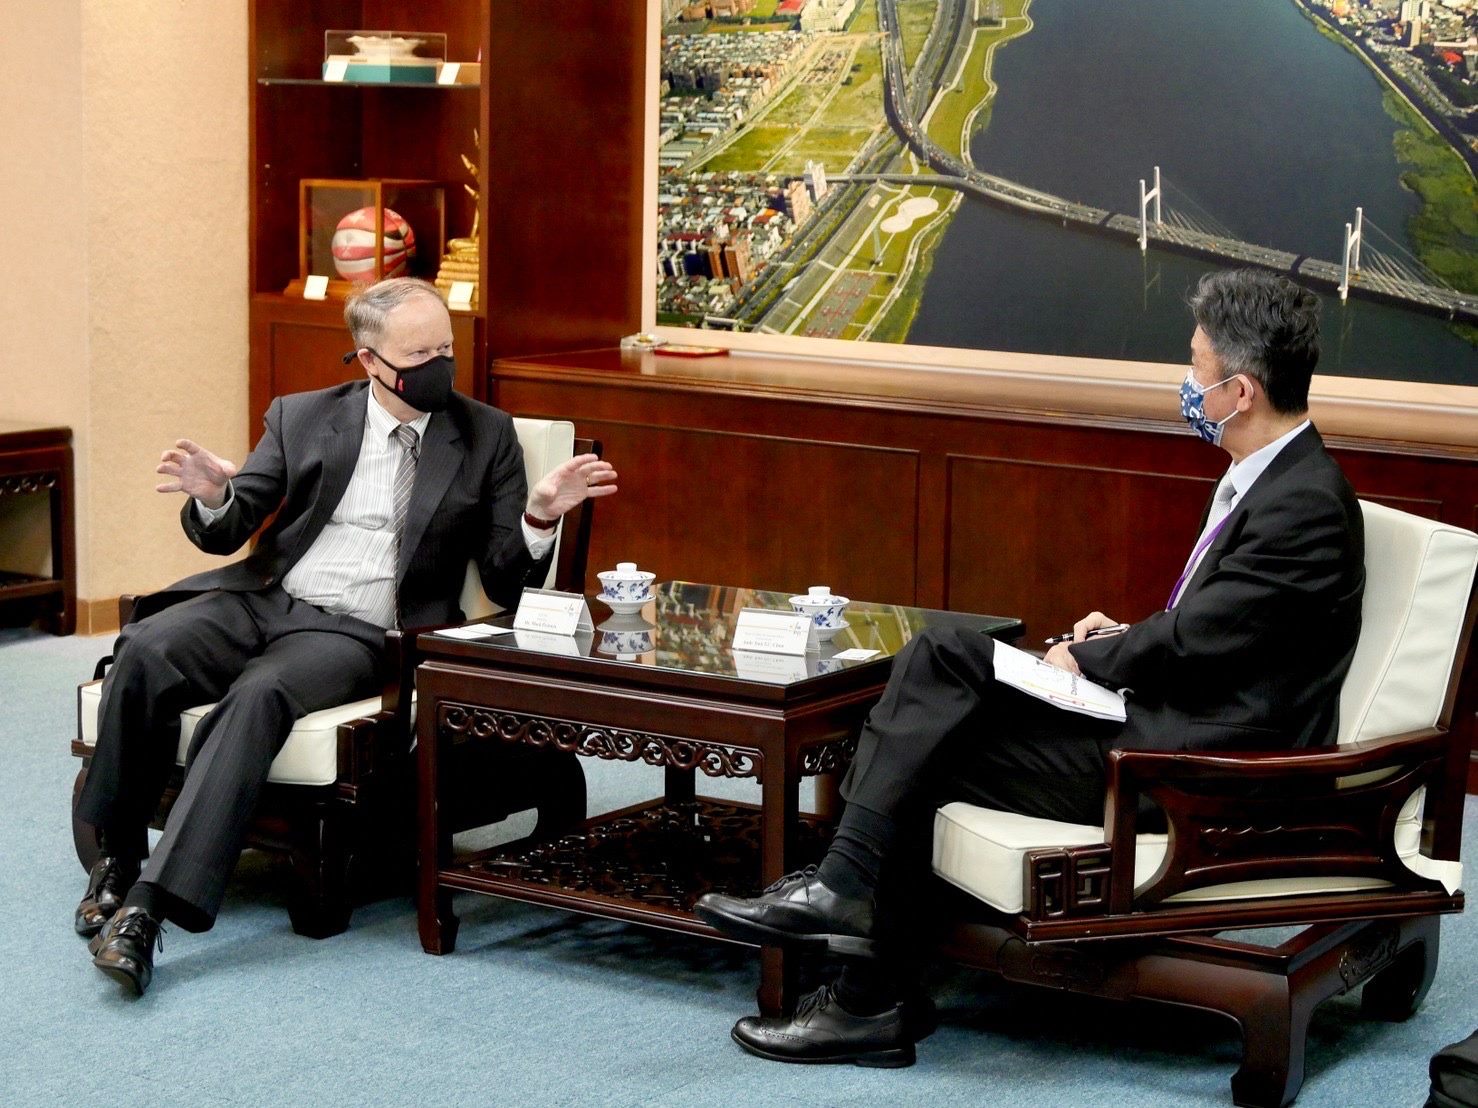 Marl Pearson wishes to promote exchange between Taipei City and Wellington. (Photo / Provided by Taipei City Government)